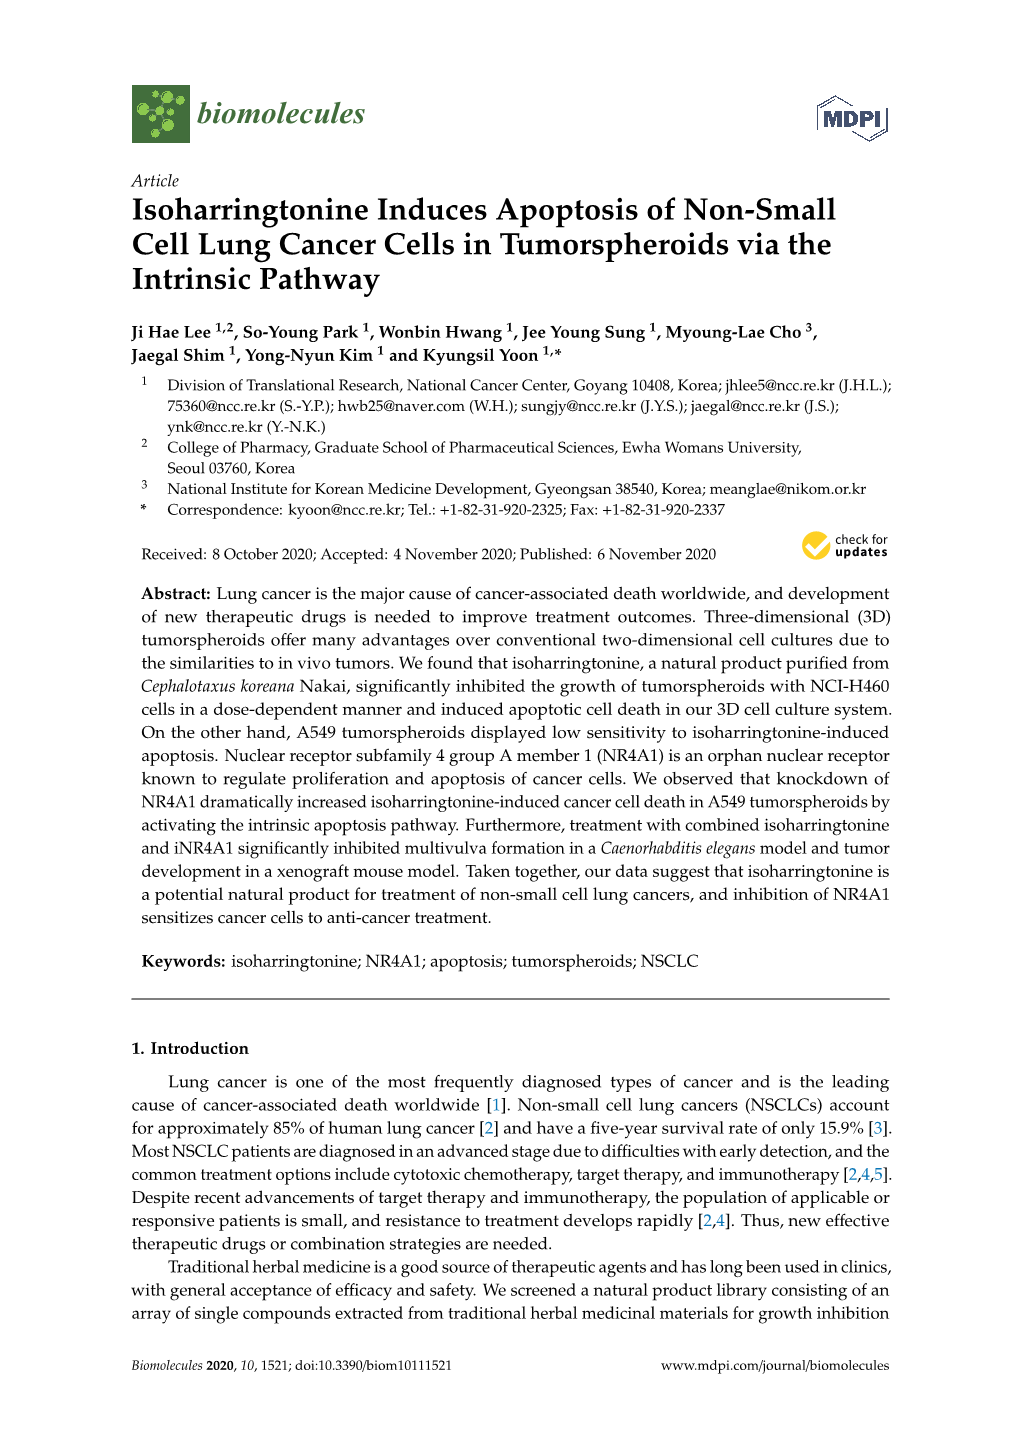 Isoharringtonine Induces Apoptosis of Non-Small Cell Lung Cancer Cells in Tumorspheroids Via the Intrinsic Pathway